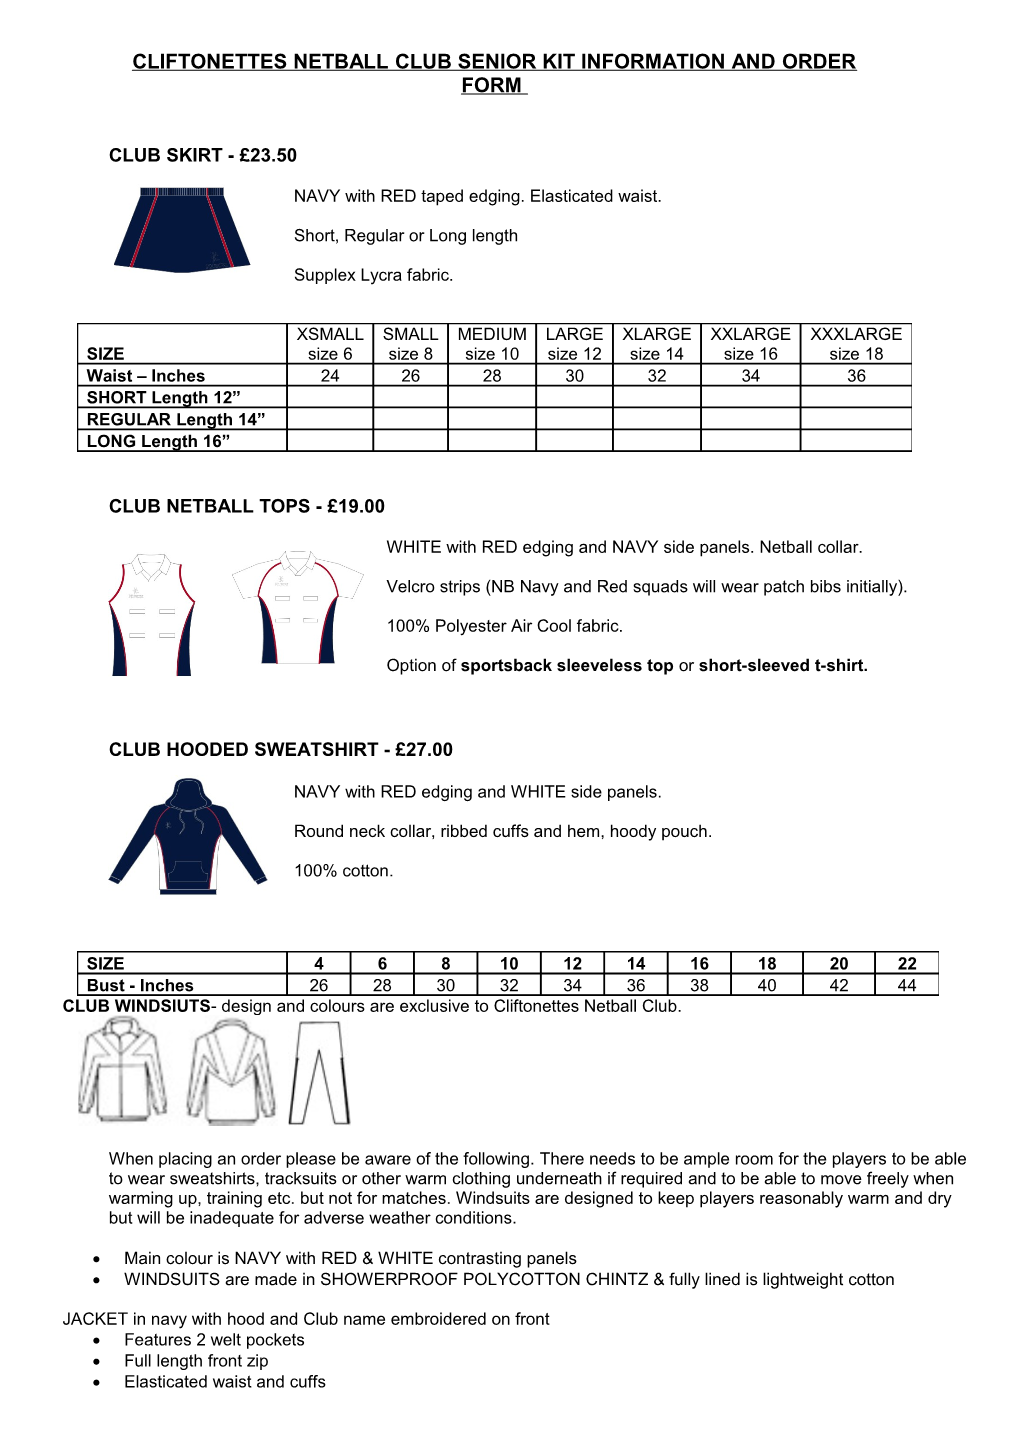 Cliftonettes Netball Club Kit Information and Order Form